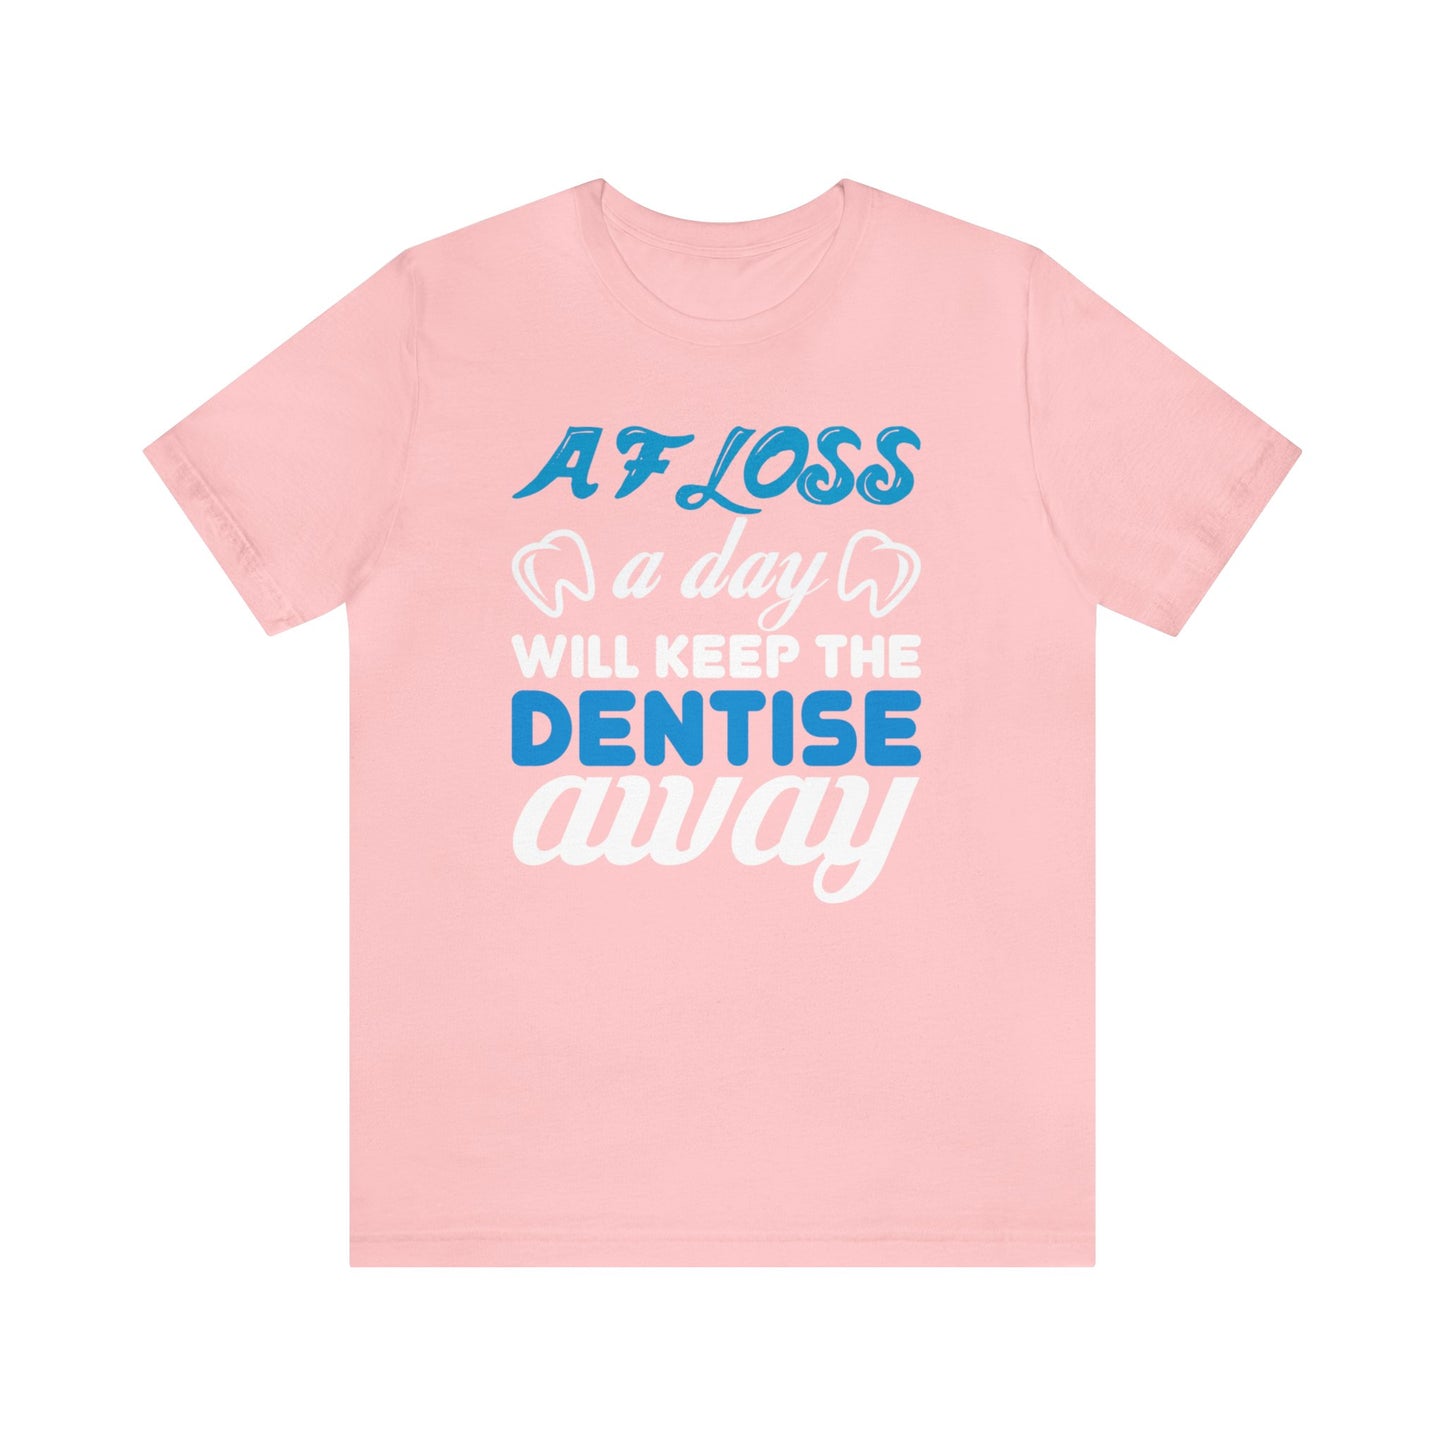 A Floss a Day Keeps the Dentist Away